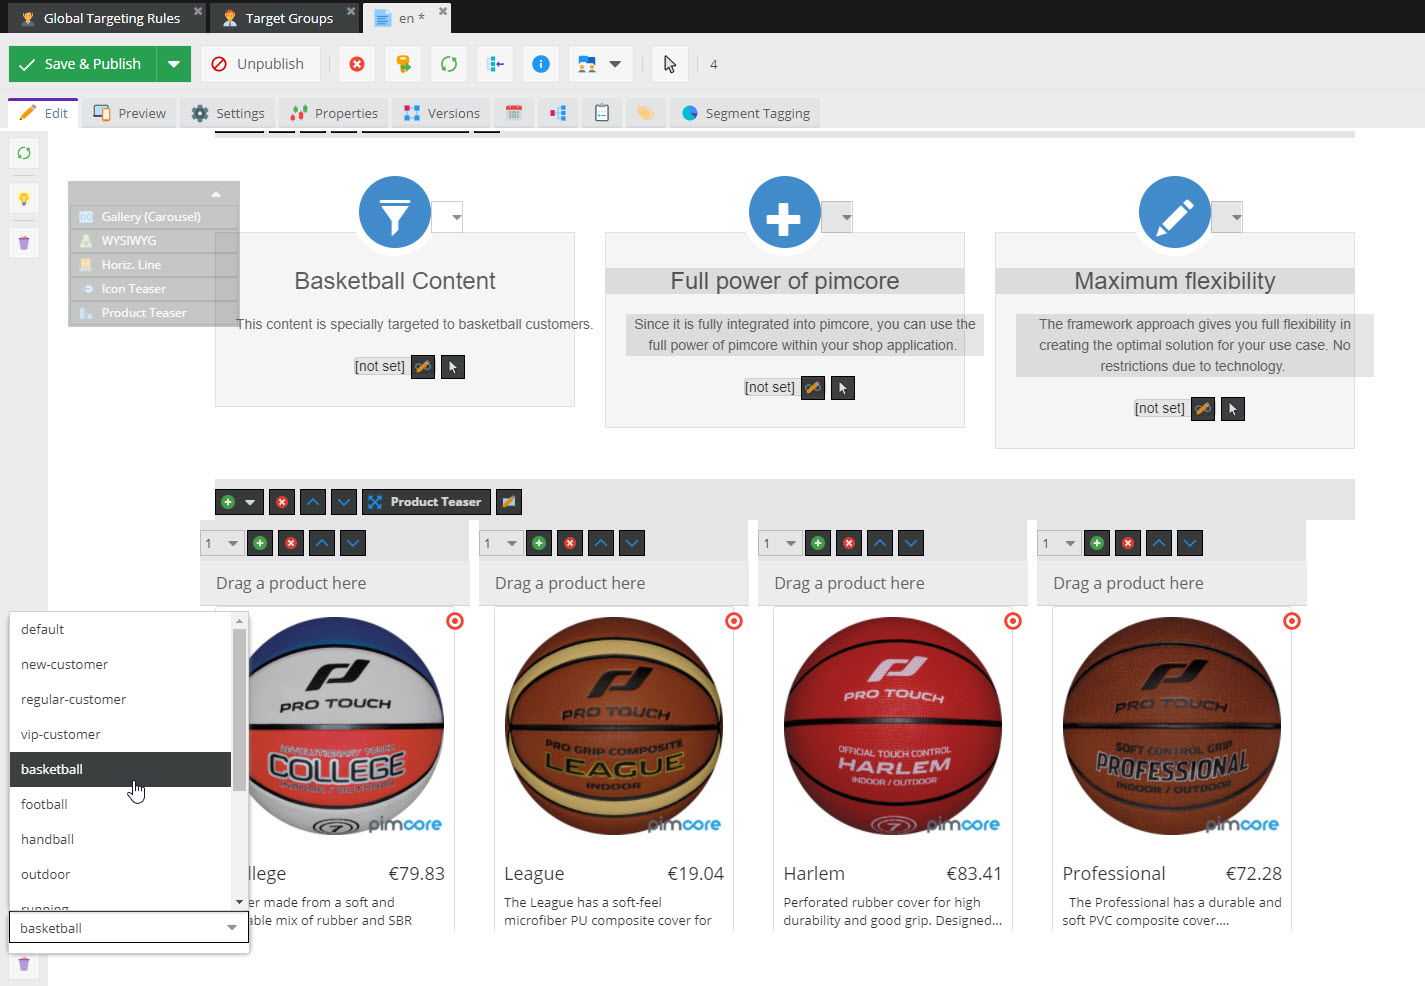 Personalized Variant for Basketball